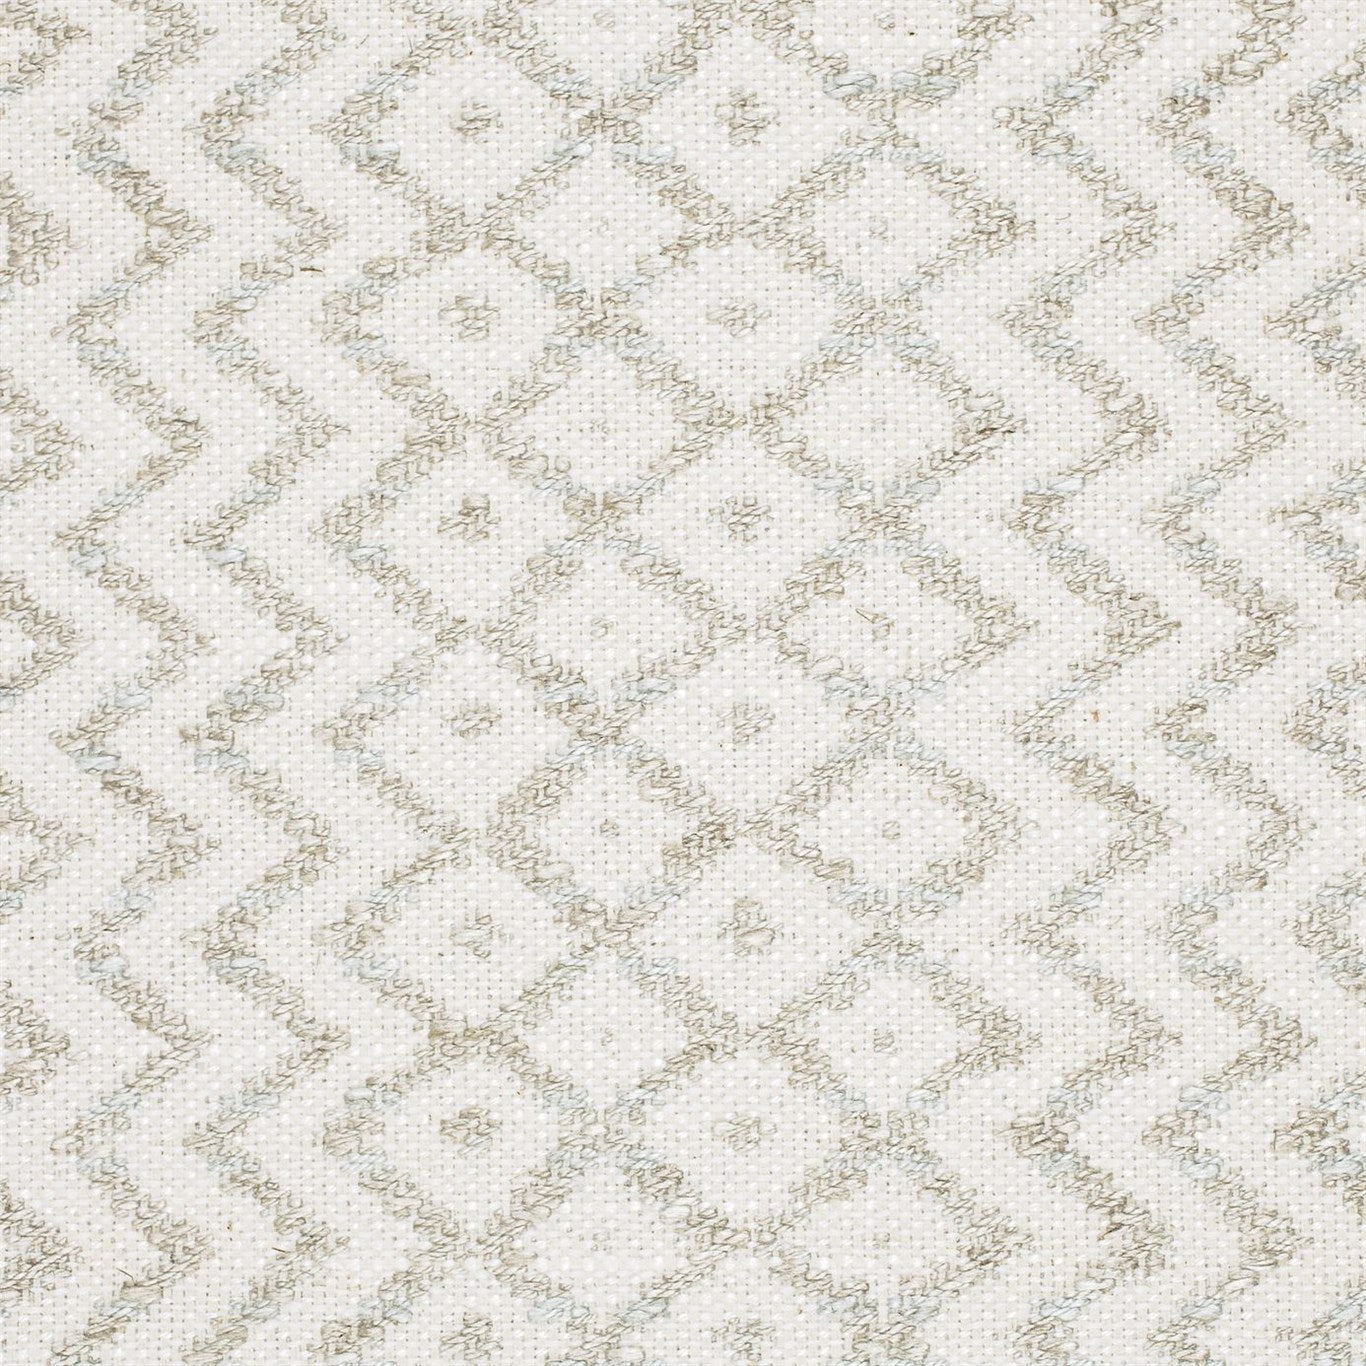 Cheslyn Fabric by Sanderson - DCLO232034 - Ivory/Silver